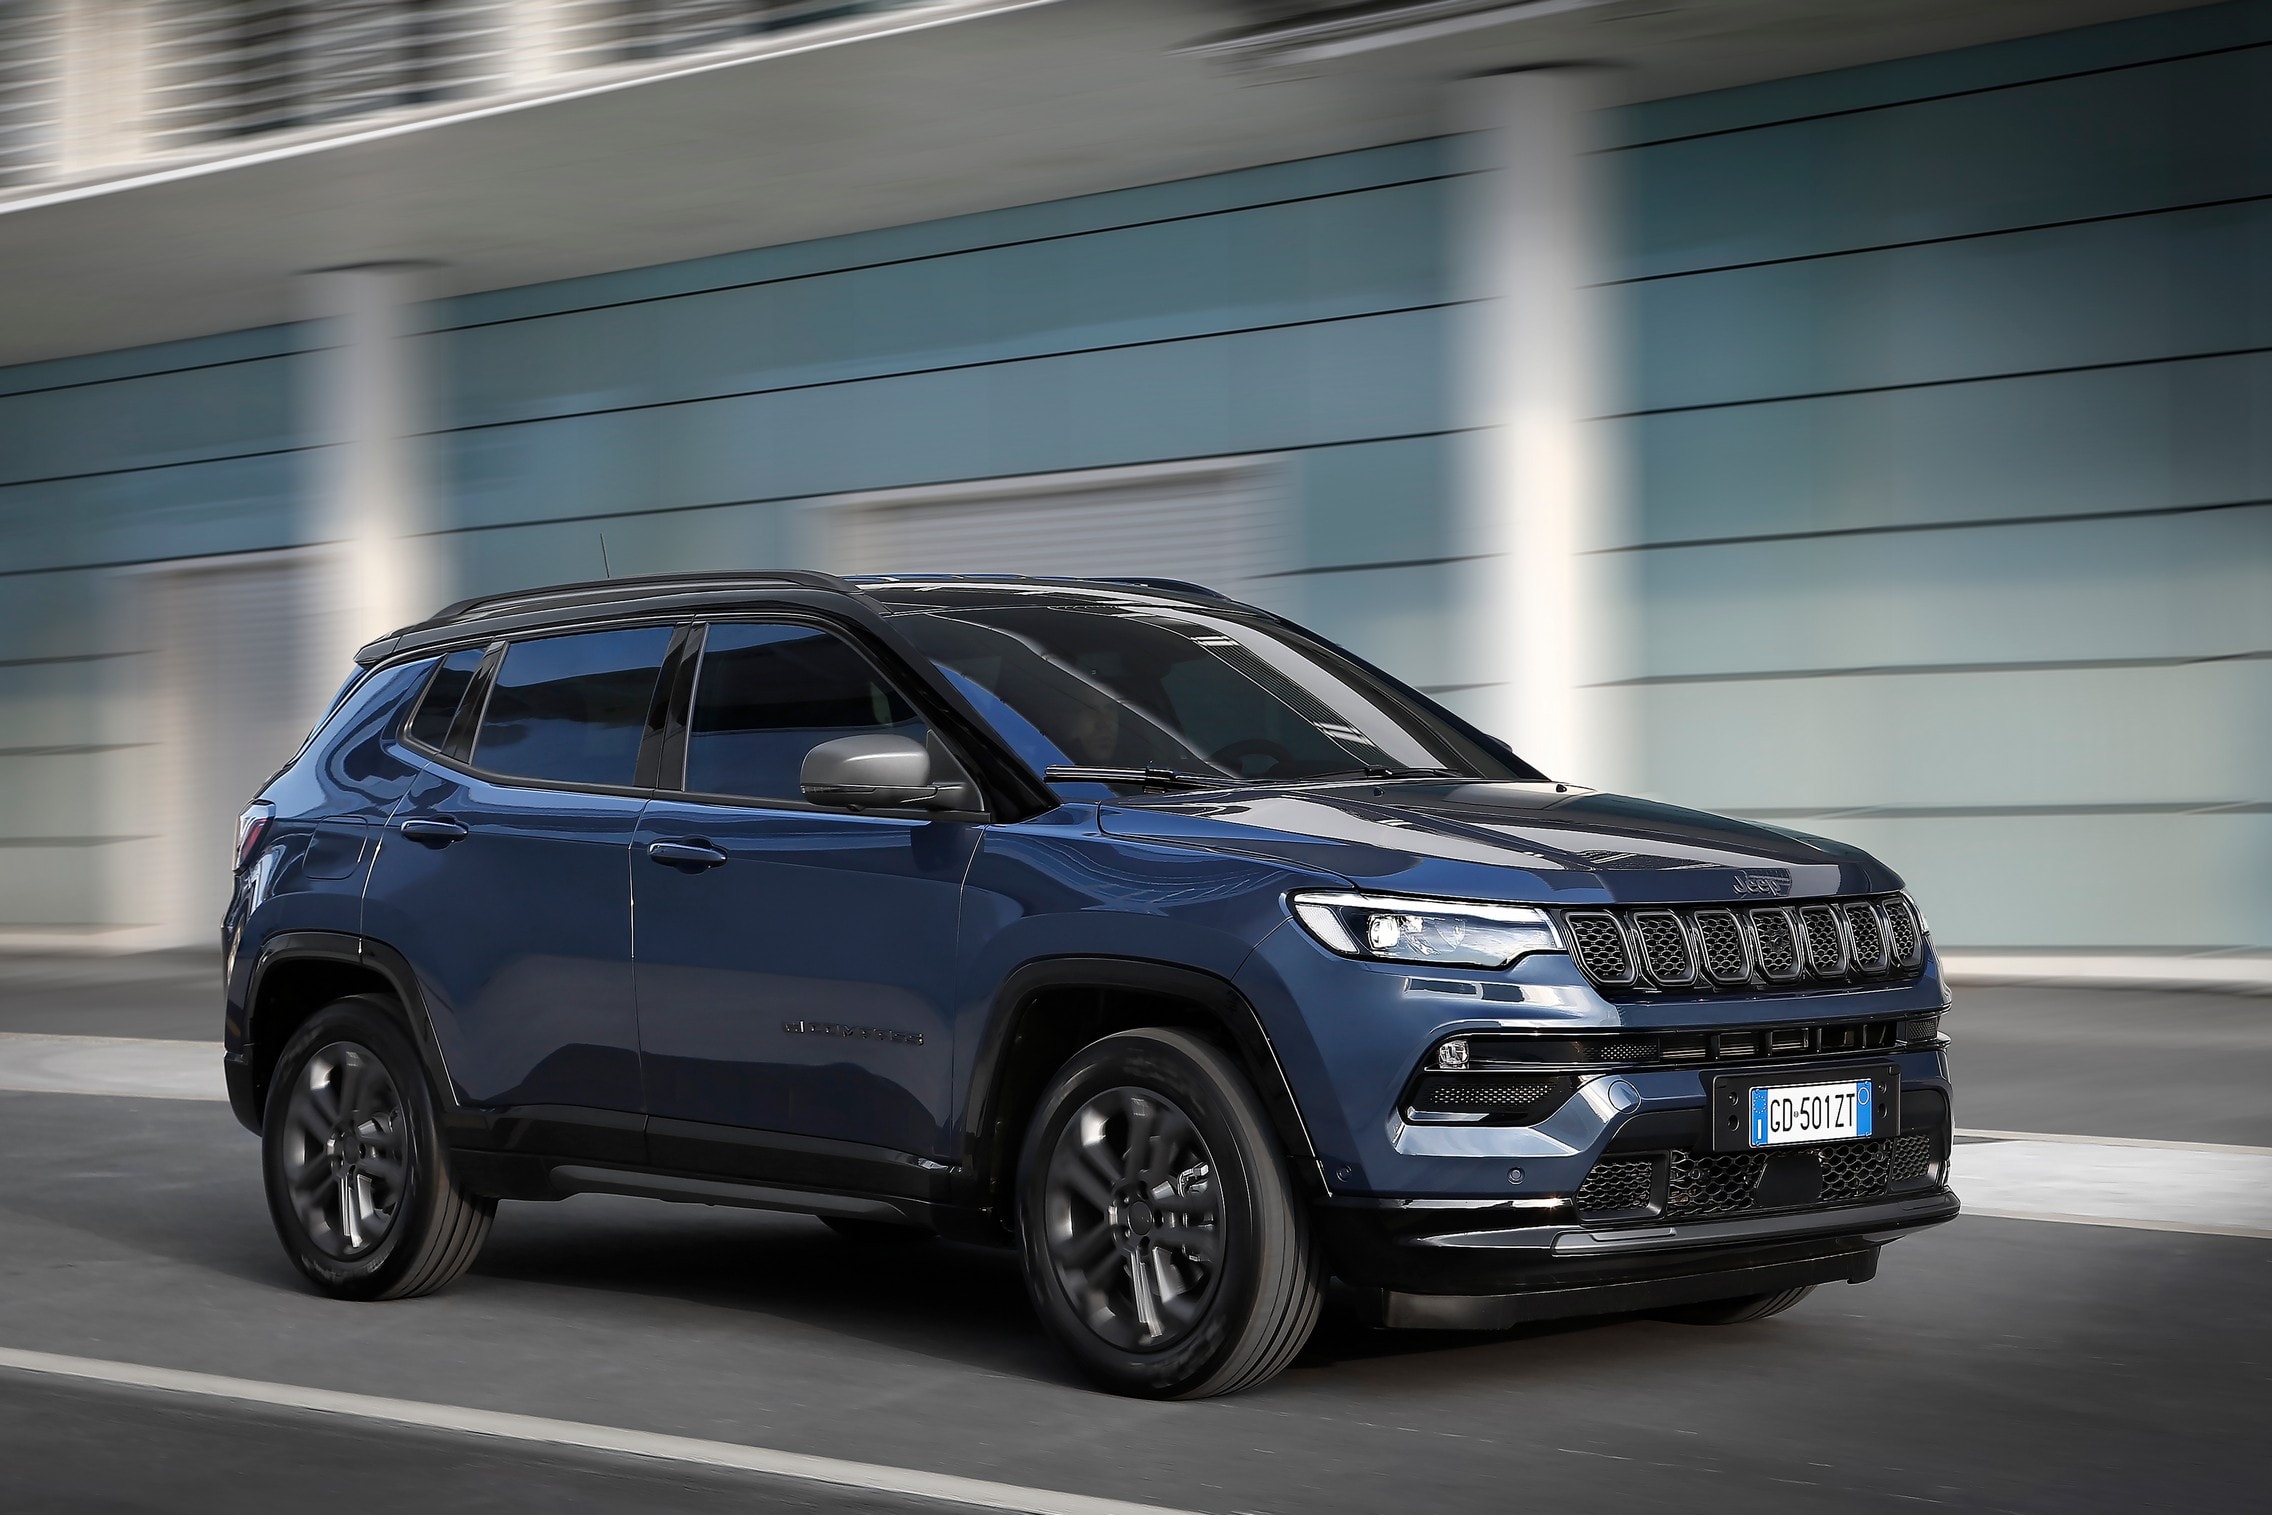 refreshed-jeep-compass-arrives-to-herald-the-android-based-uconnect-5-dominion-158860_1.jpg